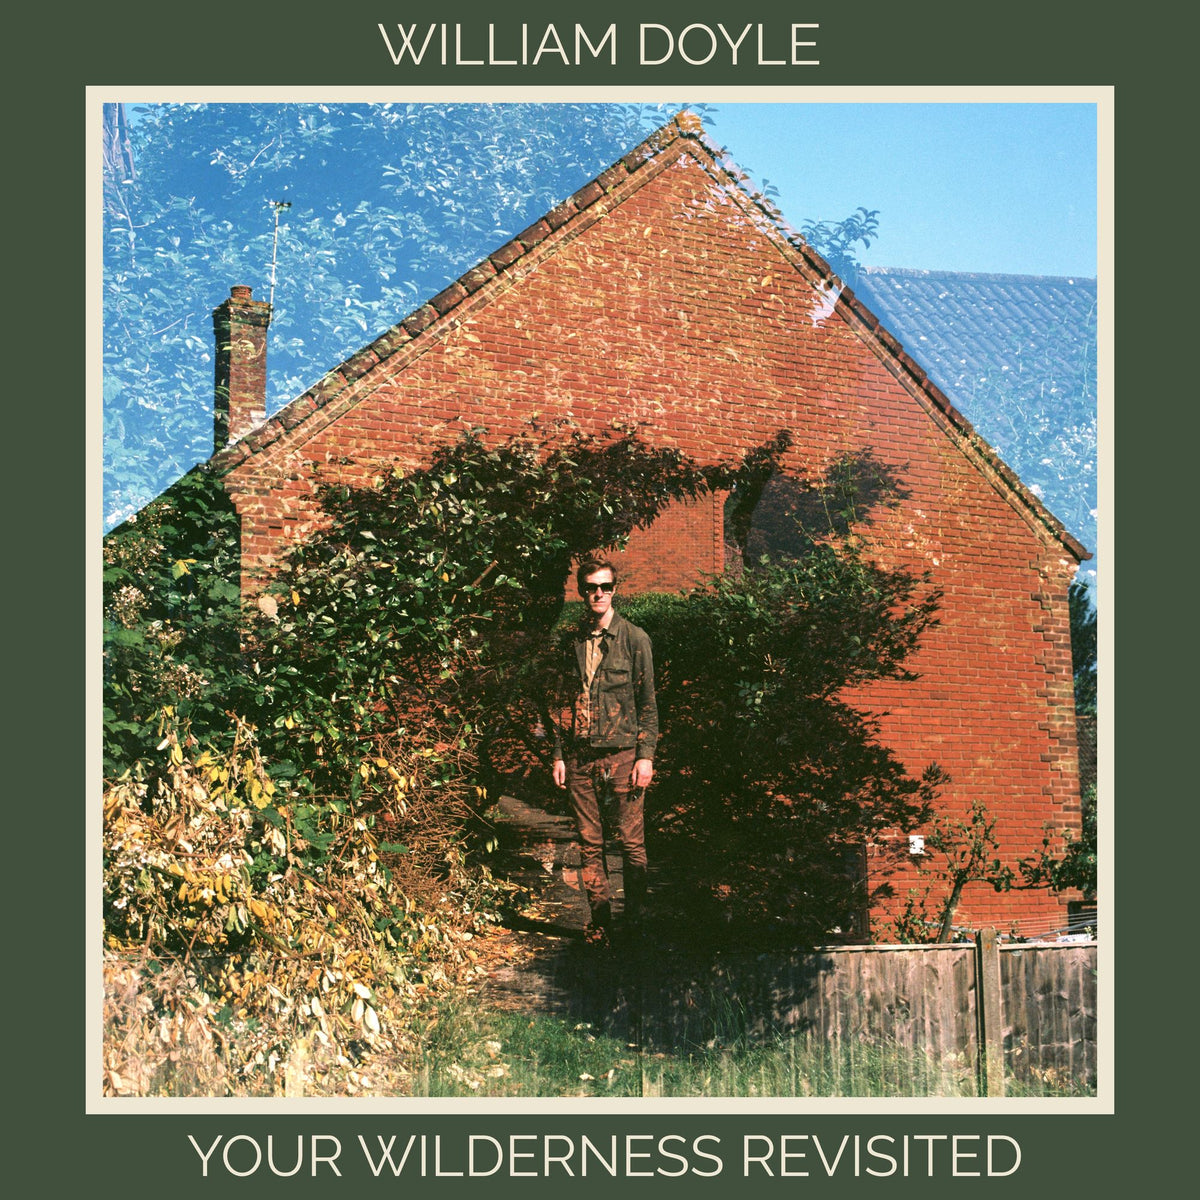 William Doyle: Your Wilderness Revisited